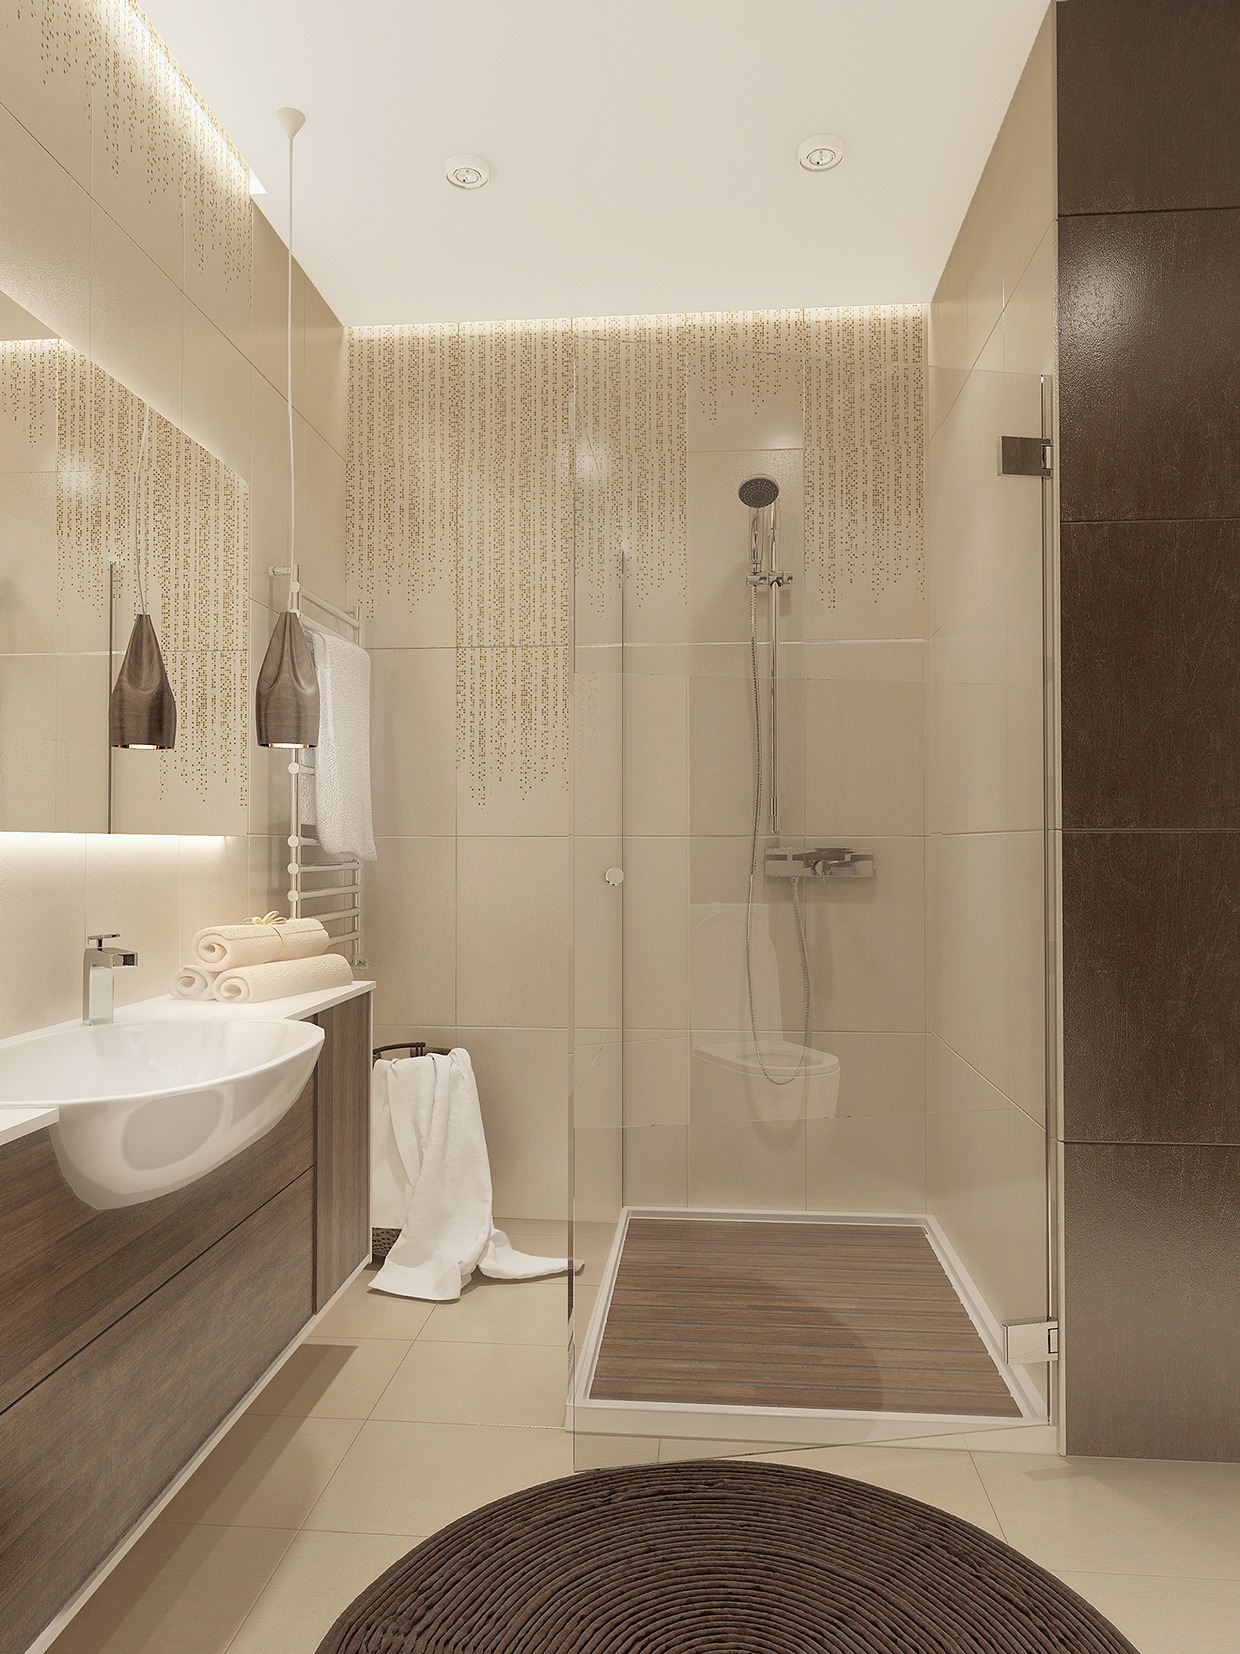 beige small bathroom design "width =" 1240 "height =" 1654 "srcset =" https://mileray.com/wp-content/uploads/2020/05/1588516389_353_Best-Ideas-To-Create-Simple-Bathroom-Designs-With-Variety-of.jpg 1240w, https: // myfashionos .com / wp-content / uploads / 2016/09 / Pavel-Voytov1-2-225x300.jpg 225w, https://mileray.com/wp-content/uploads/2016/09/Pavel-Voytov1-2-768x1024. jpg 768w, https://mileray.com/wp-content/uploads/2016/09/Pavel-Voytov1-2-696x928.jpg 696w, https://mileray.com/wp-content/uploads/2016/09/ Pavel-Voytov1-2-1068x1425.jpg 1068w, https://mileray.com/wp-content/uploads/2016/09/Pavel-Voytov1-2-315x420.jpg 315w "Sizes =" (maximum width: 1240px) 100vw , 1240px